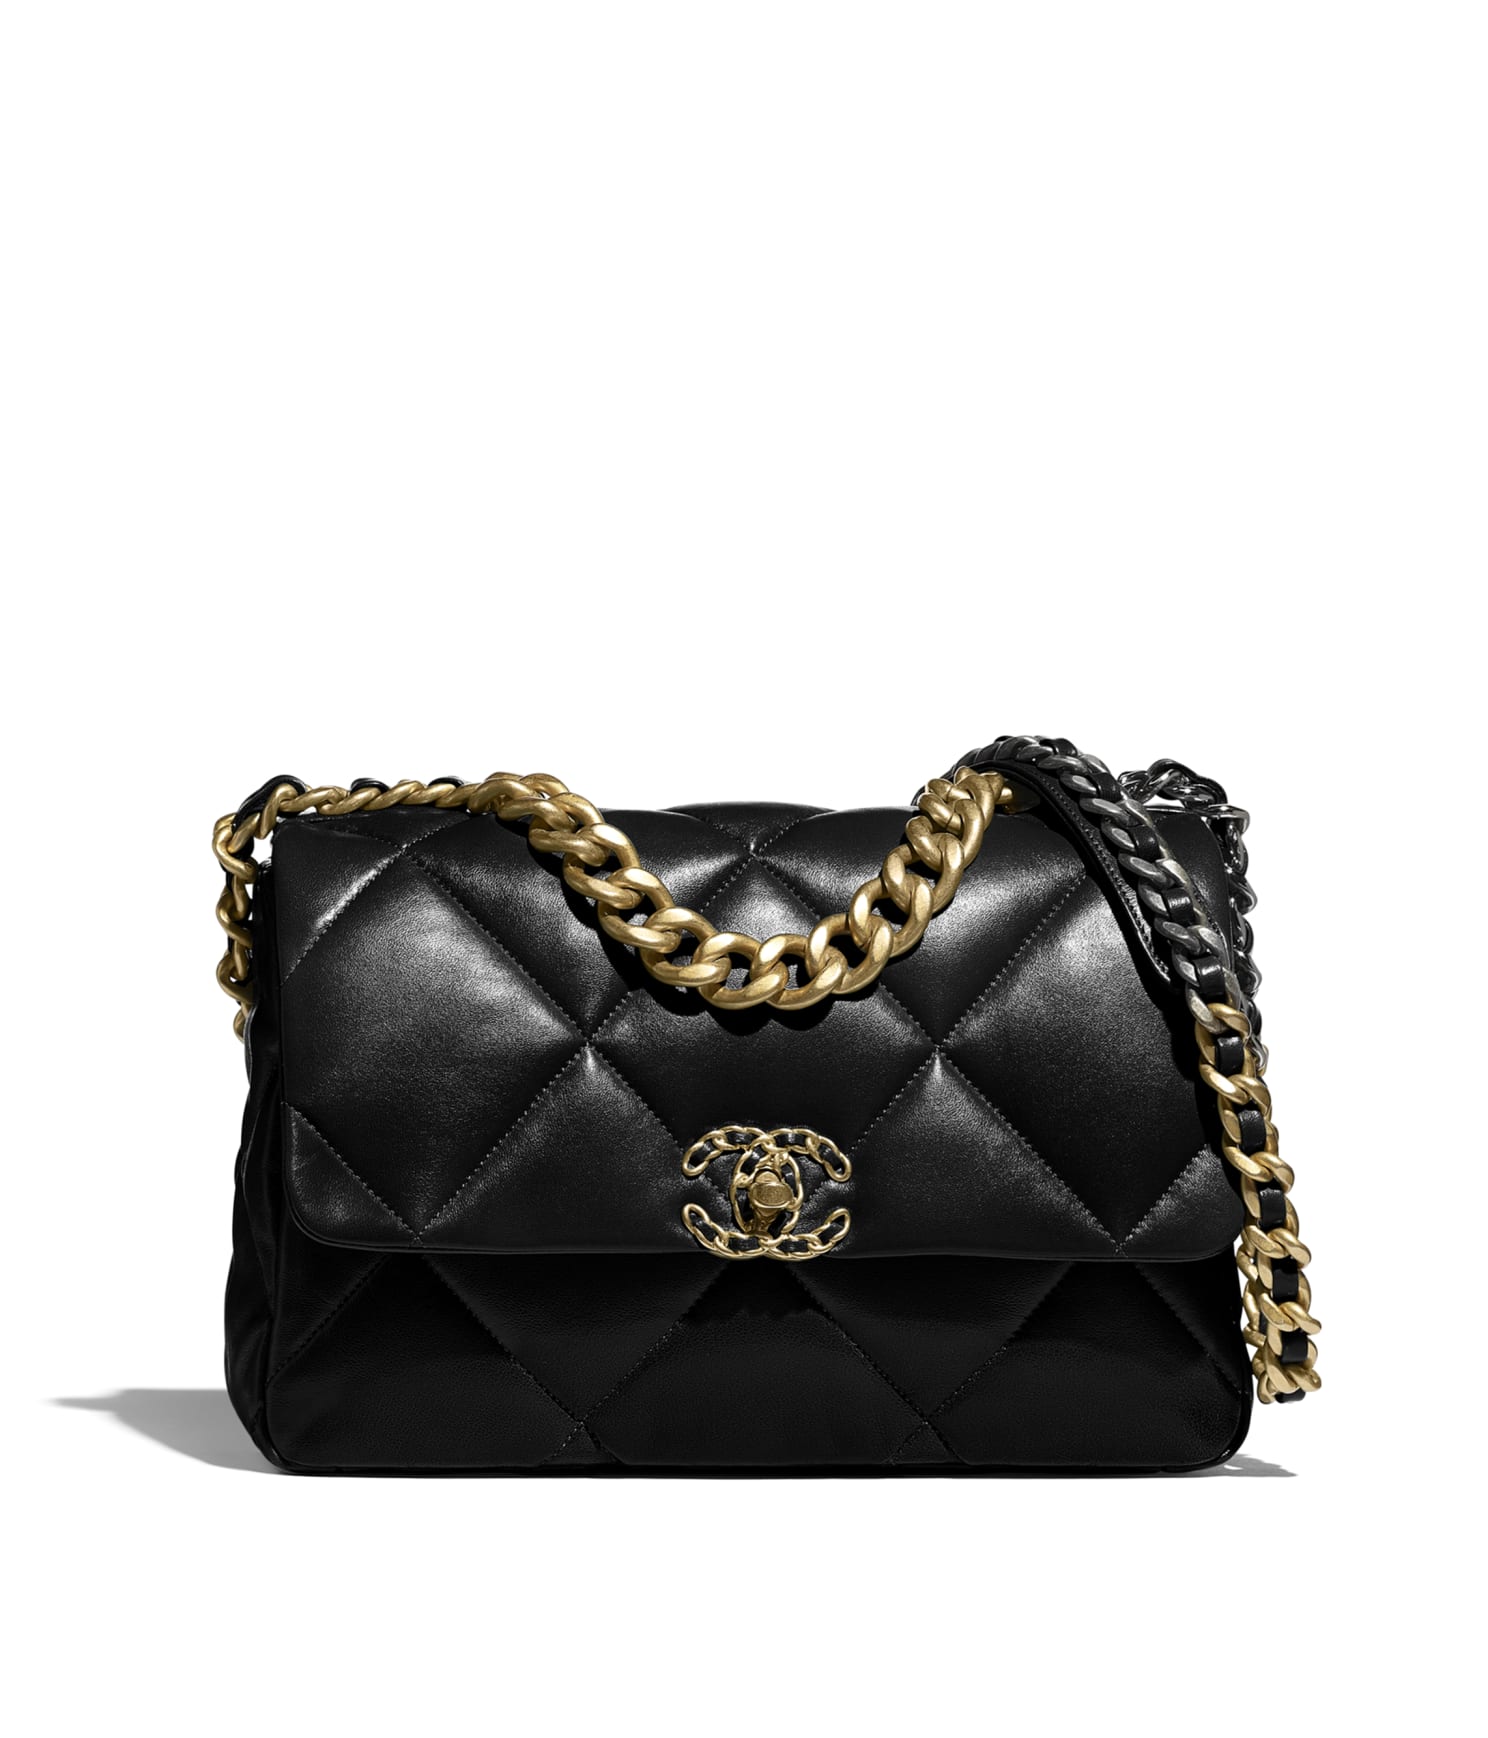 Chanel - Medium (Large) Chanel 19 Flap Bag - Luxe Front